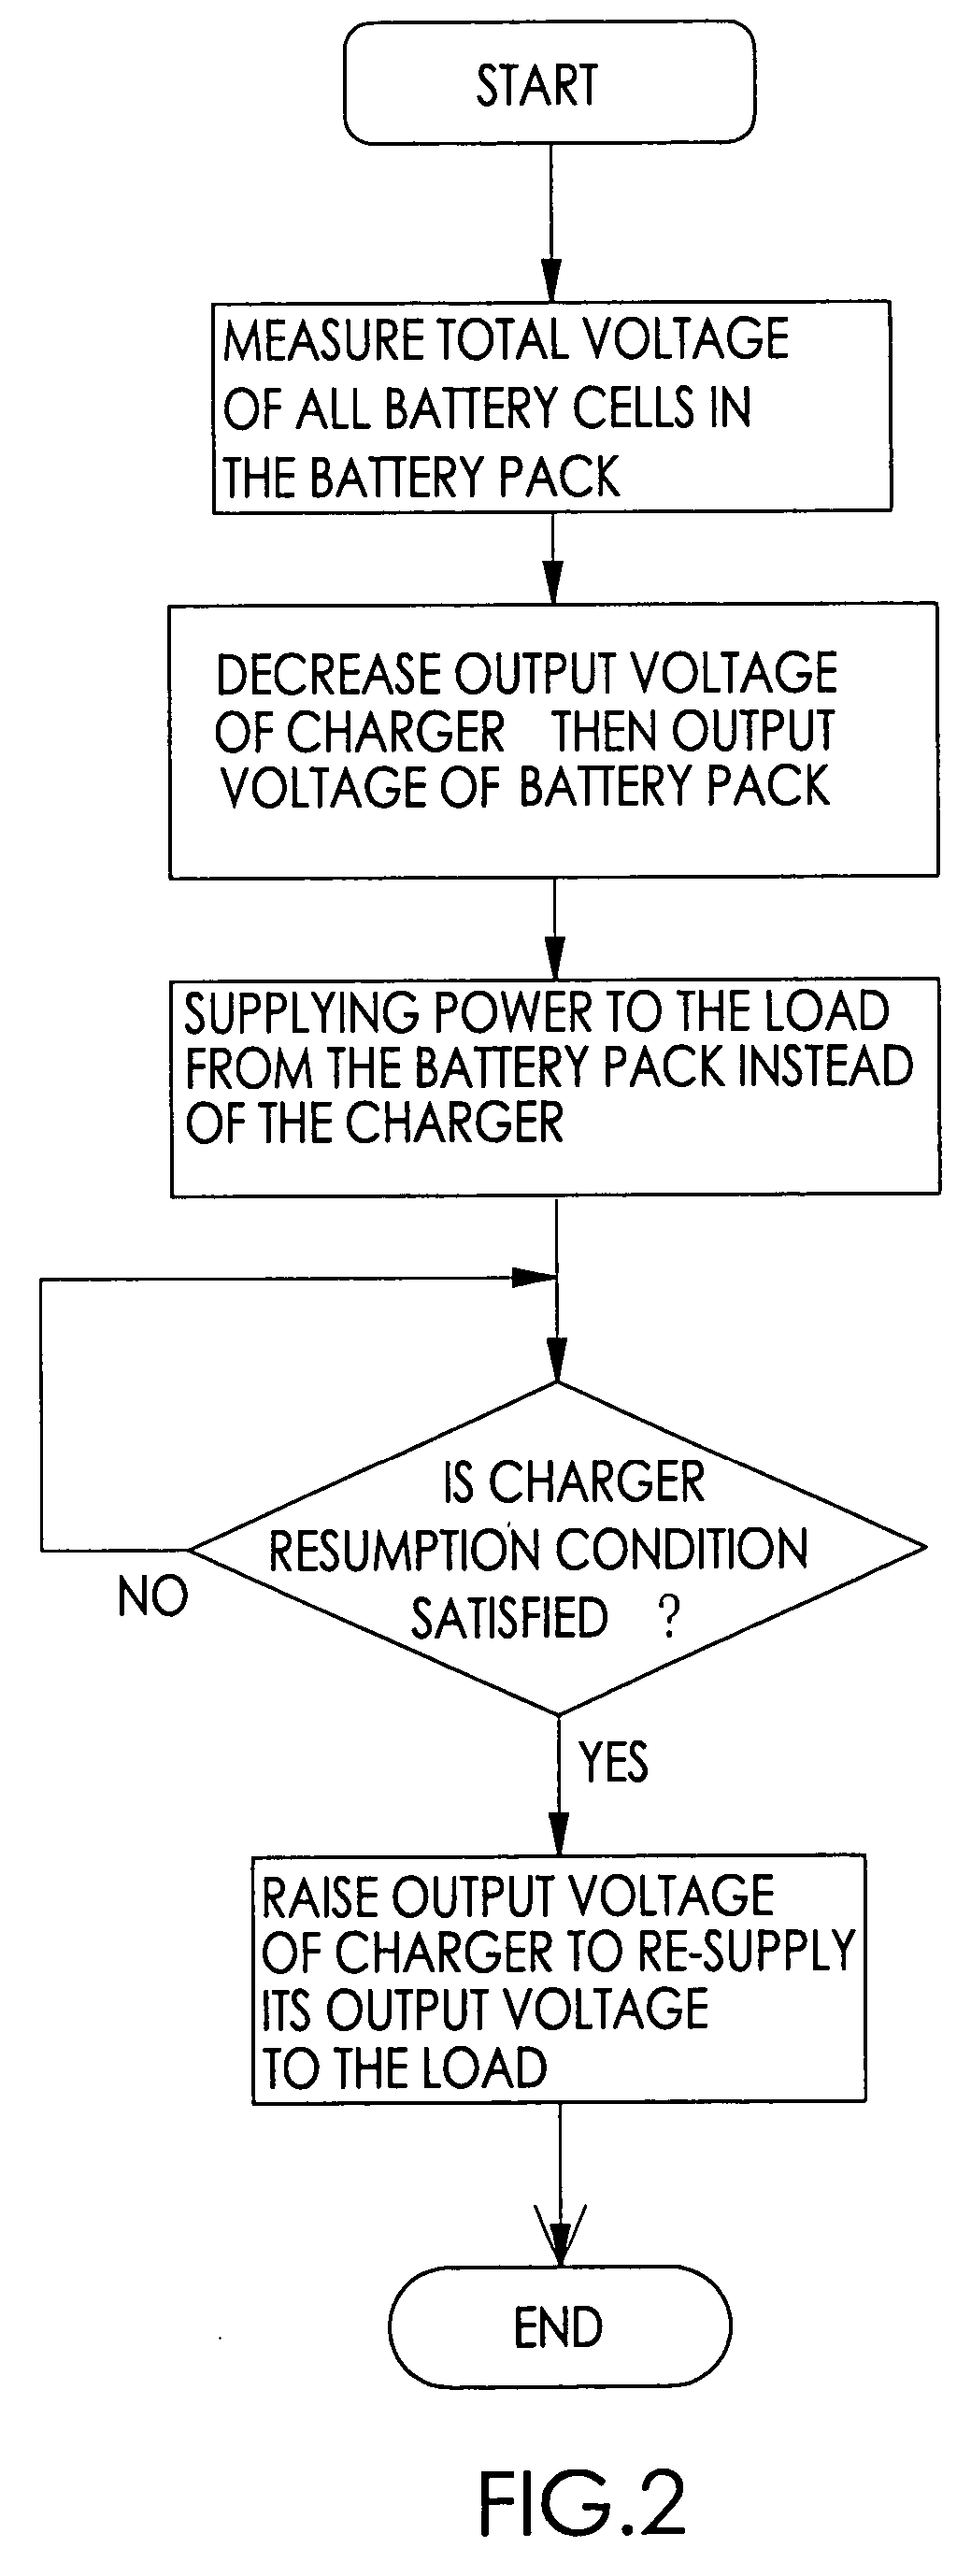 Method of testing a battery pack by purposeful charge/discharge operations